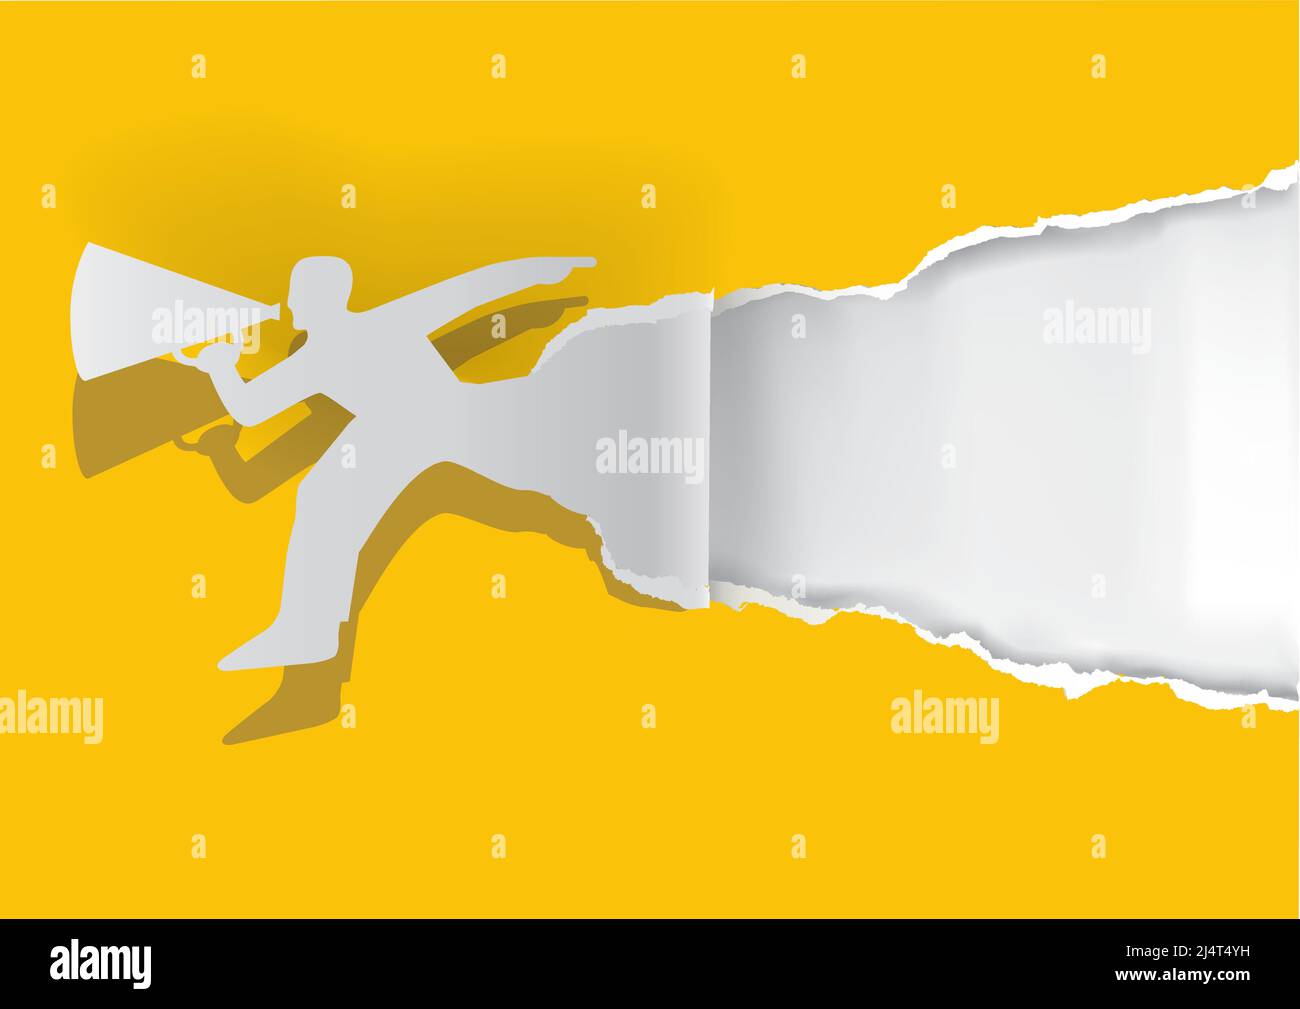 Running Man with megaphone tearing yellow paper. Illustration of torn paper male silhouette. Template for banner, place for your text or image. Stock Vector